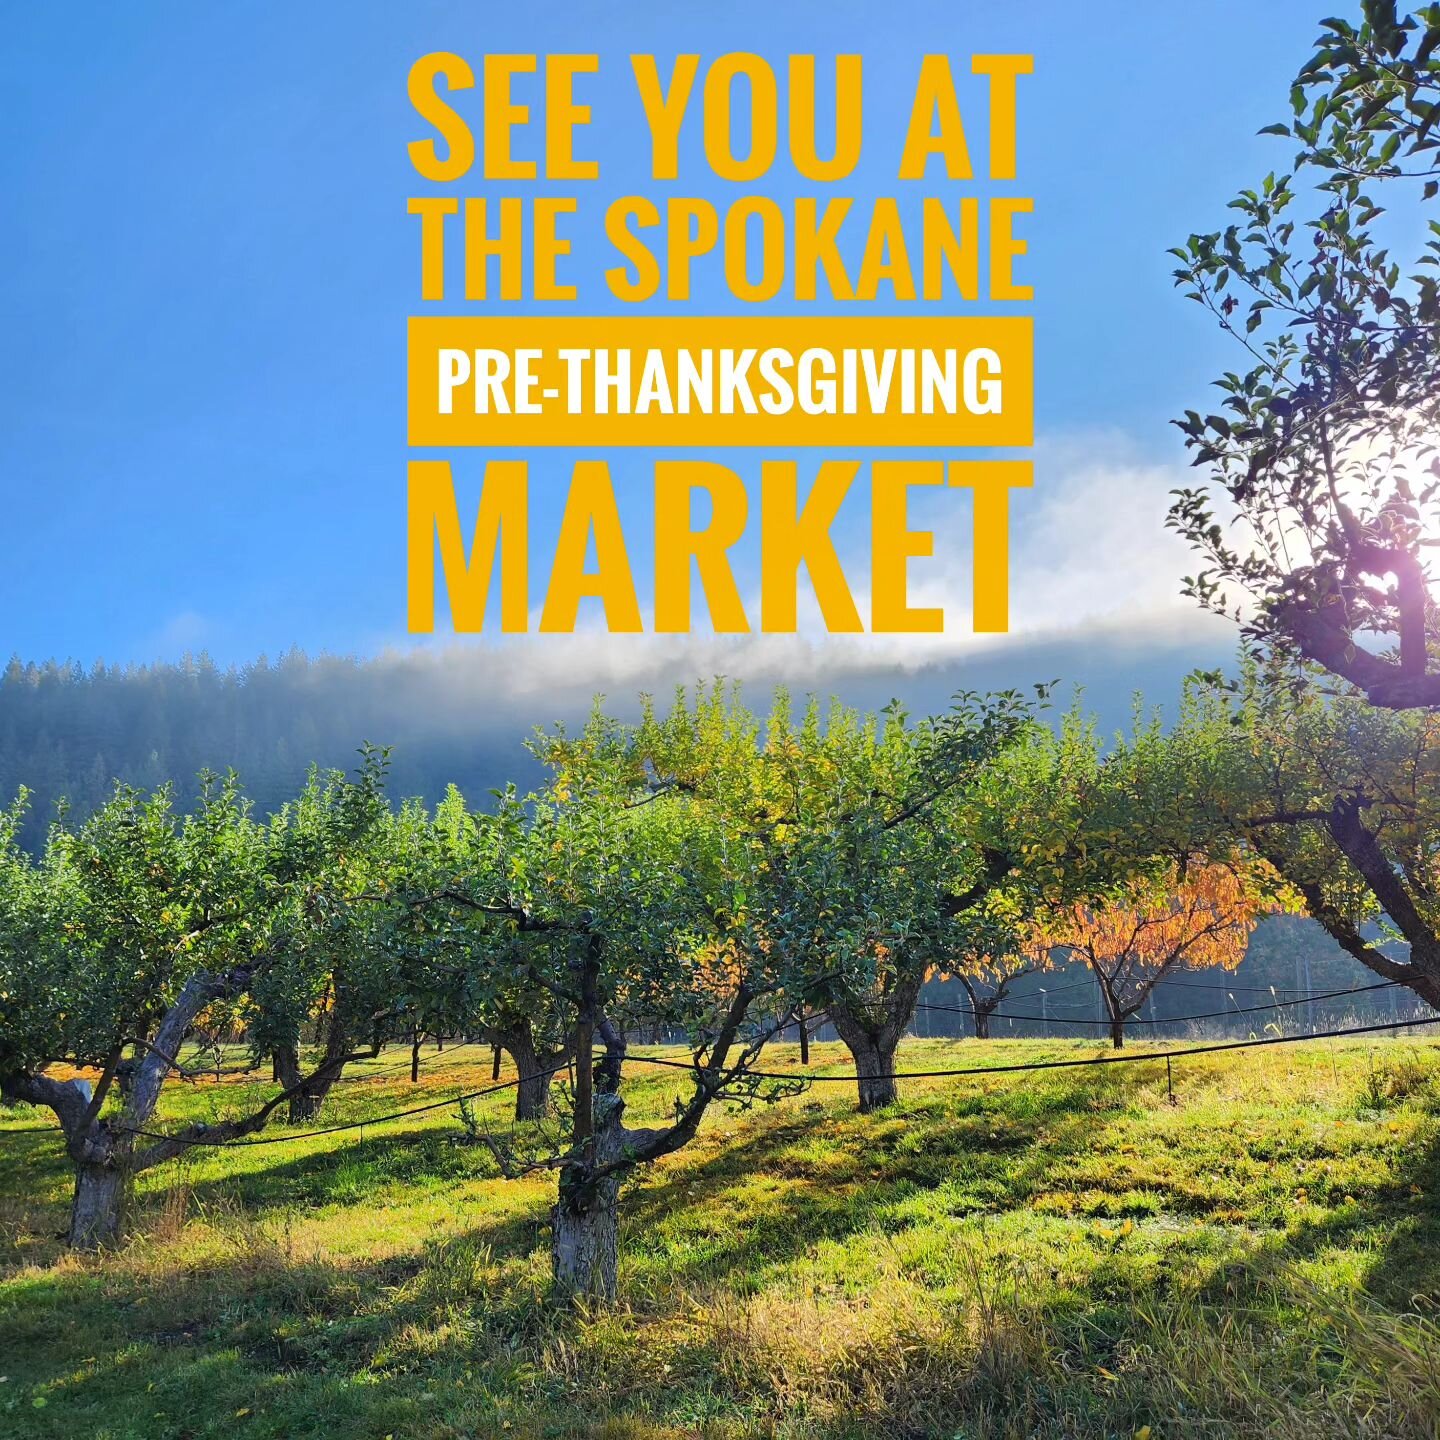 This Saturday, we will be at the Spokane Pre-Thanksgiving market from 10am - 1pm with boxes of Bosc &amp; D'Anjou pears and mixed #2 apple boxes for sauce &amp; pies!